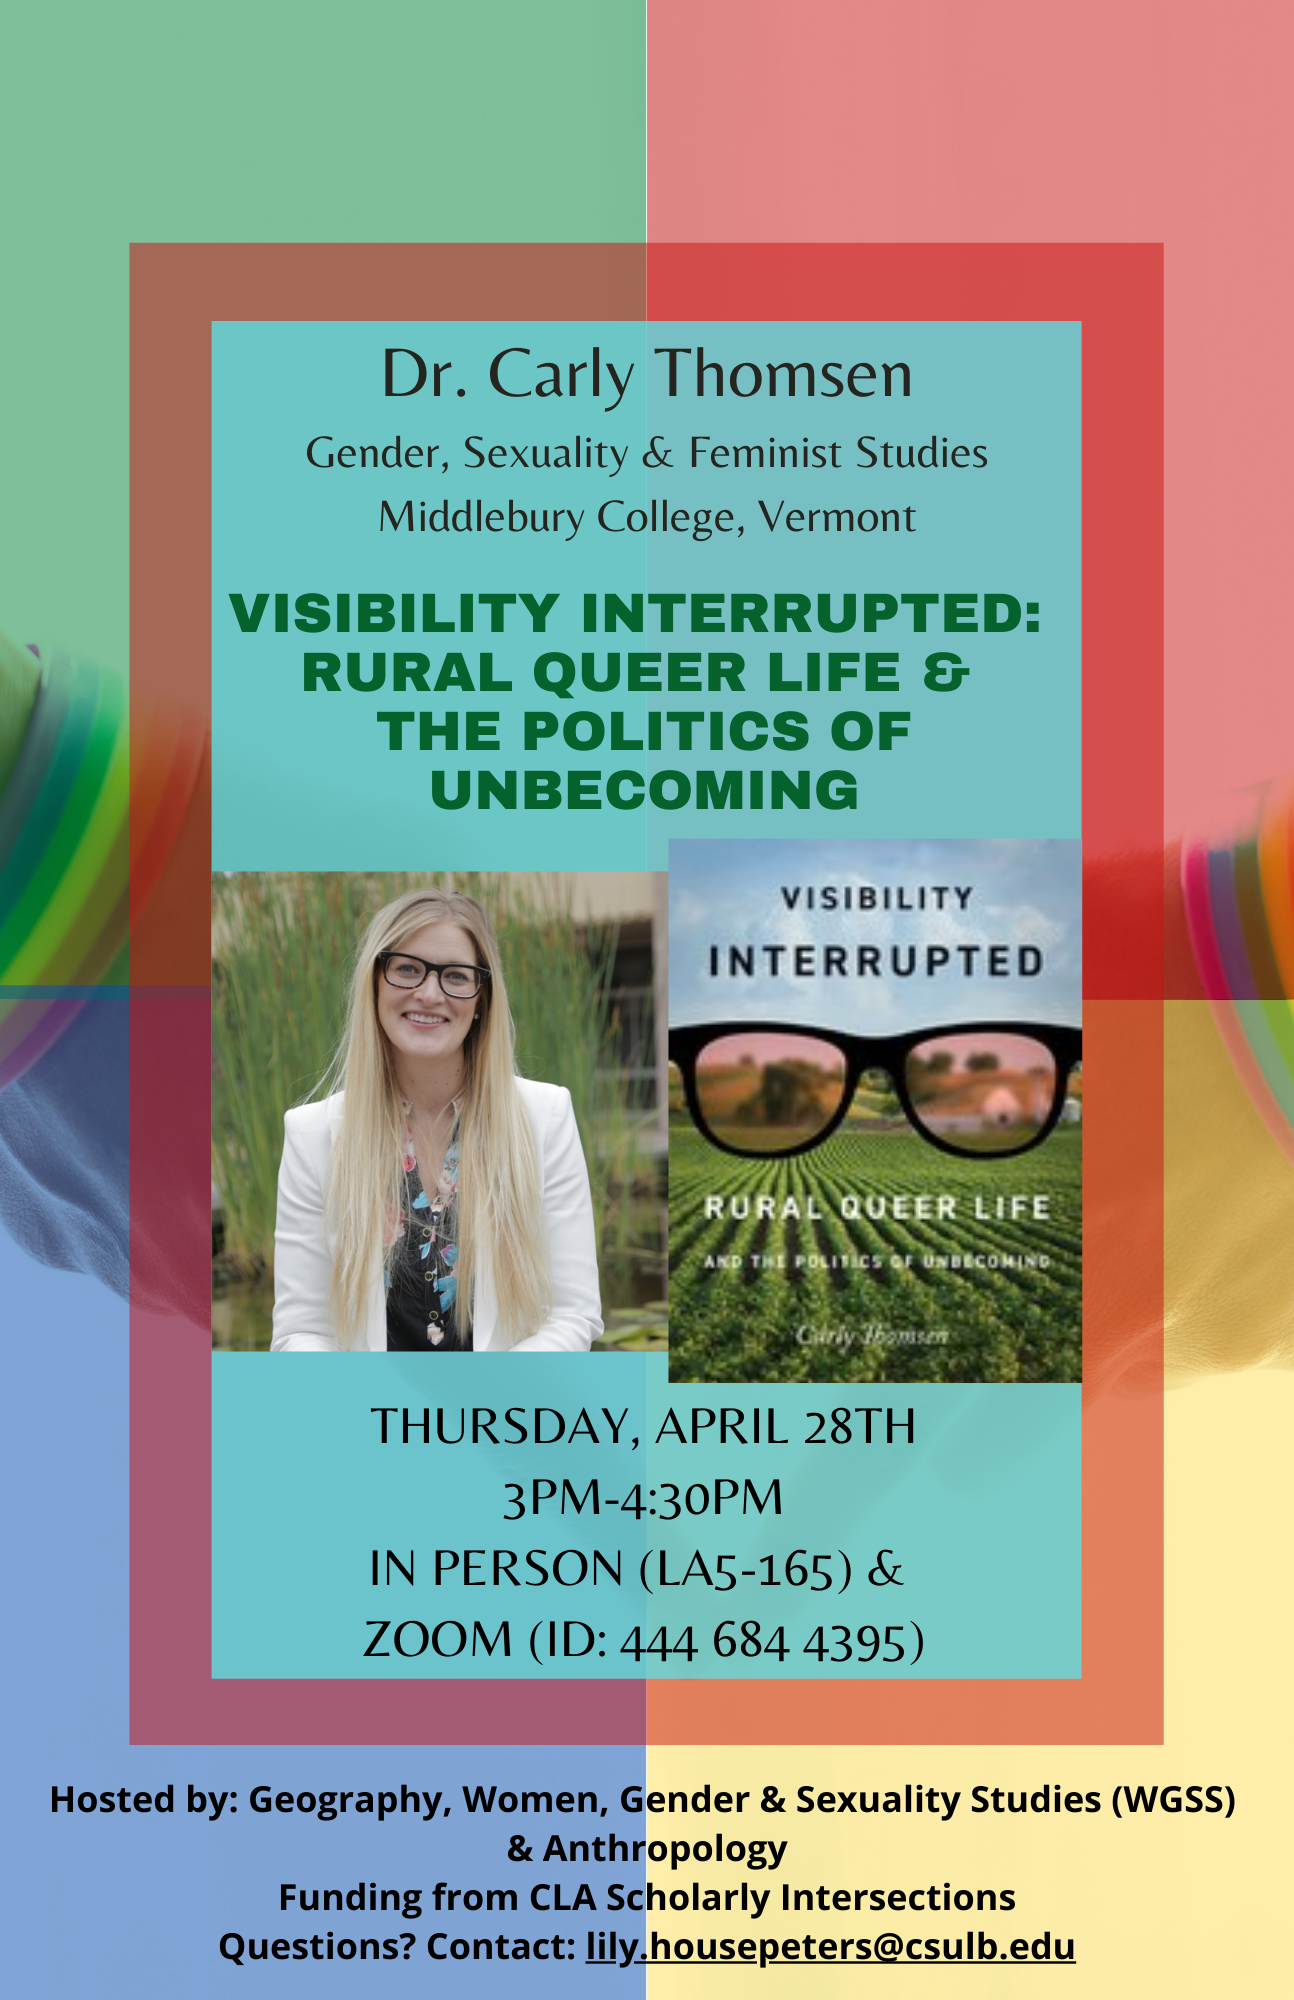 Visibility Interrupted_Rural Queer Life_4.28.2022 Carly Thomsen Event